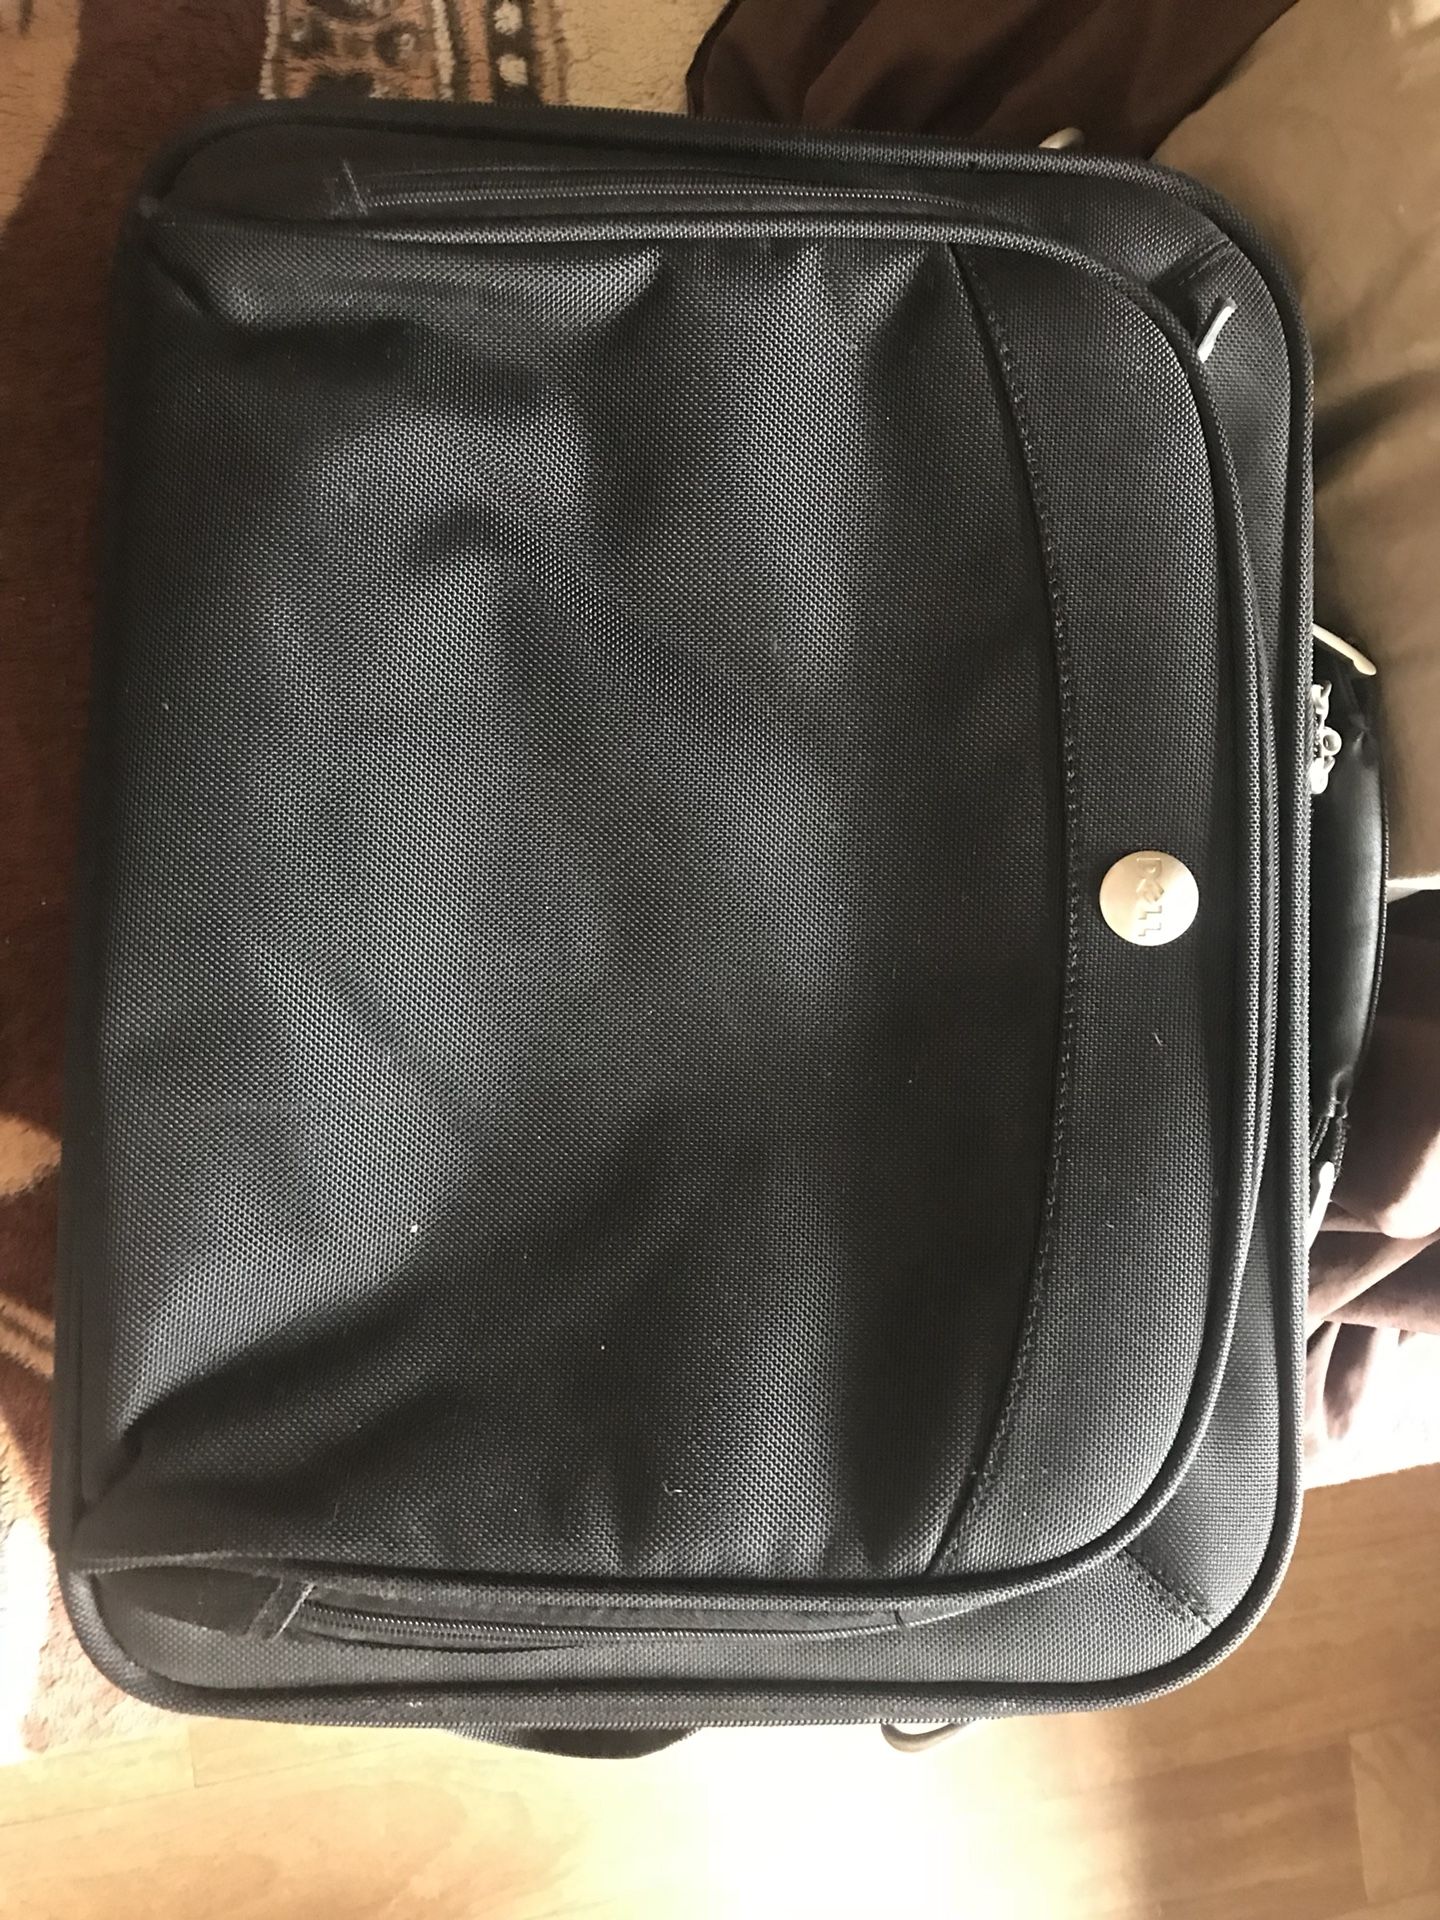 Dell laptop bag very clean like new.